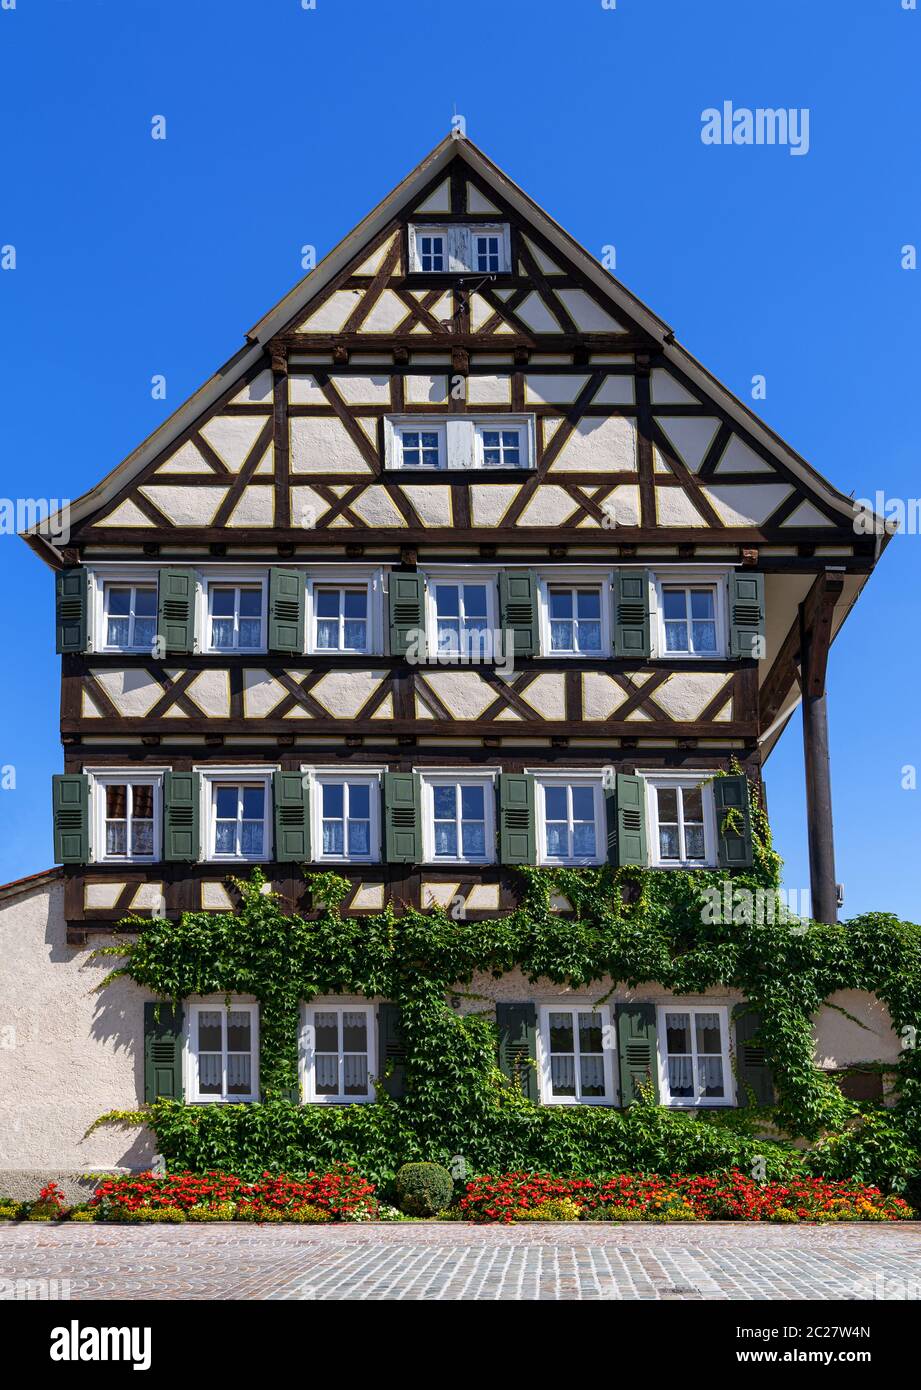 Old, partly overgrown half-timbered house - youth hostel in Balingen, Germany Stock Photo